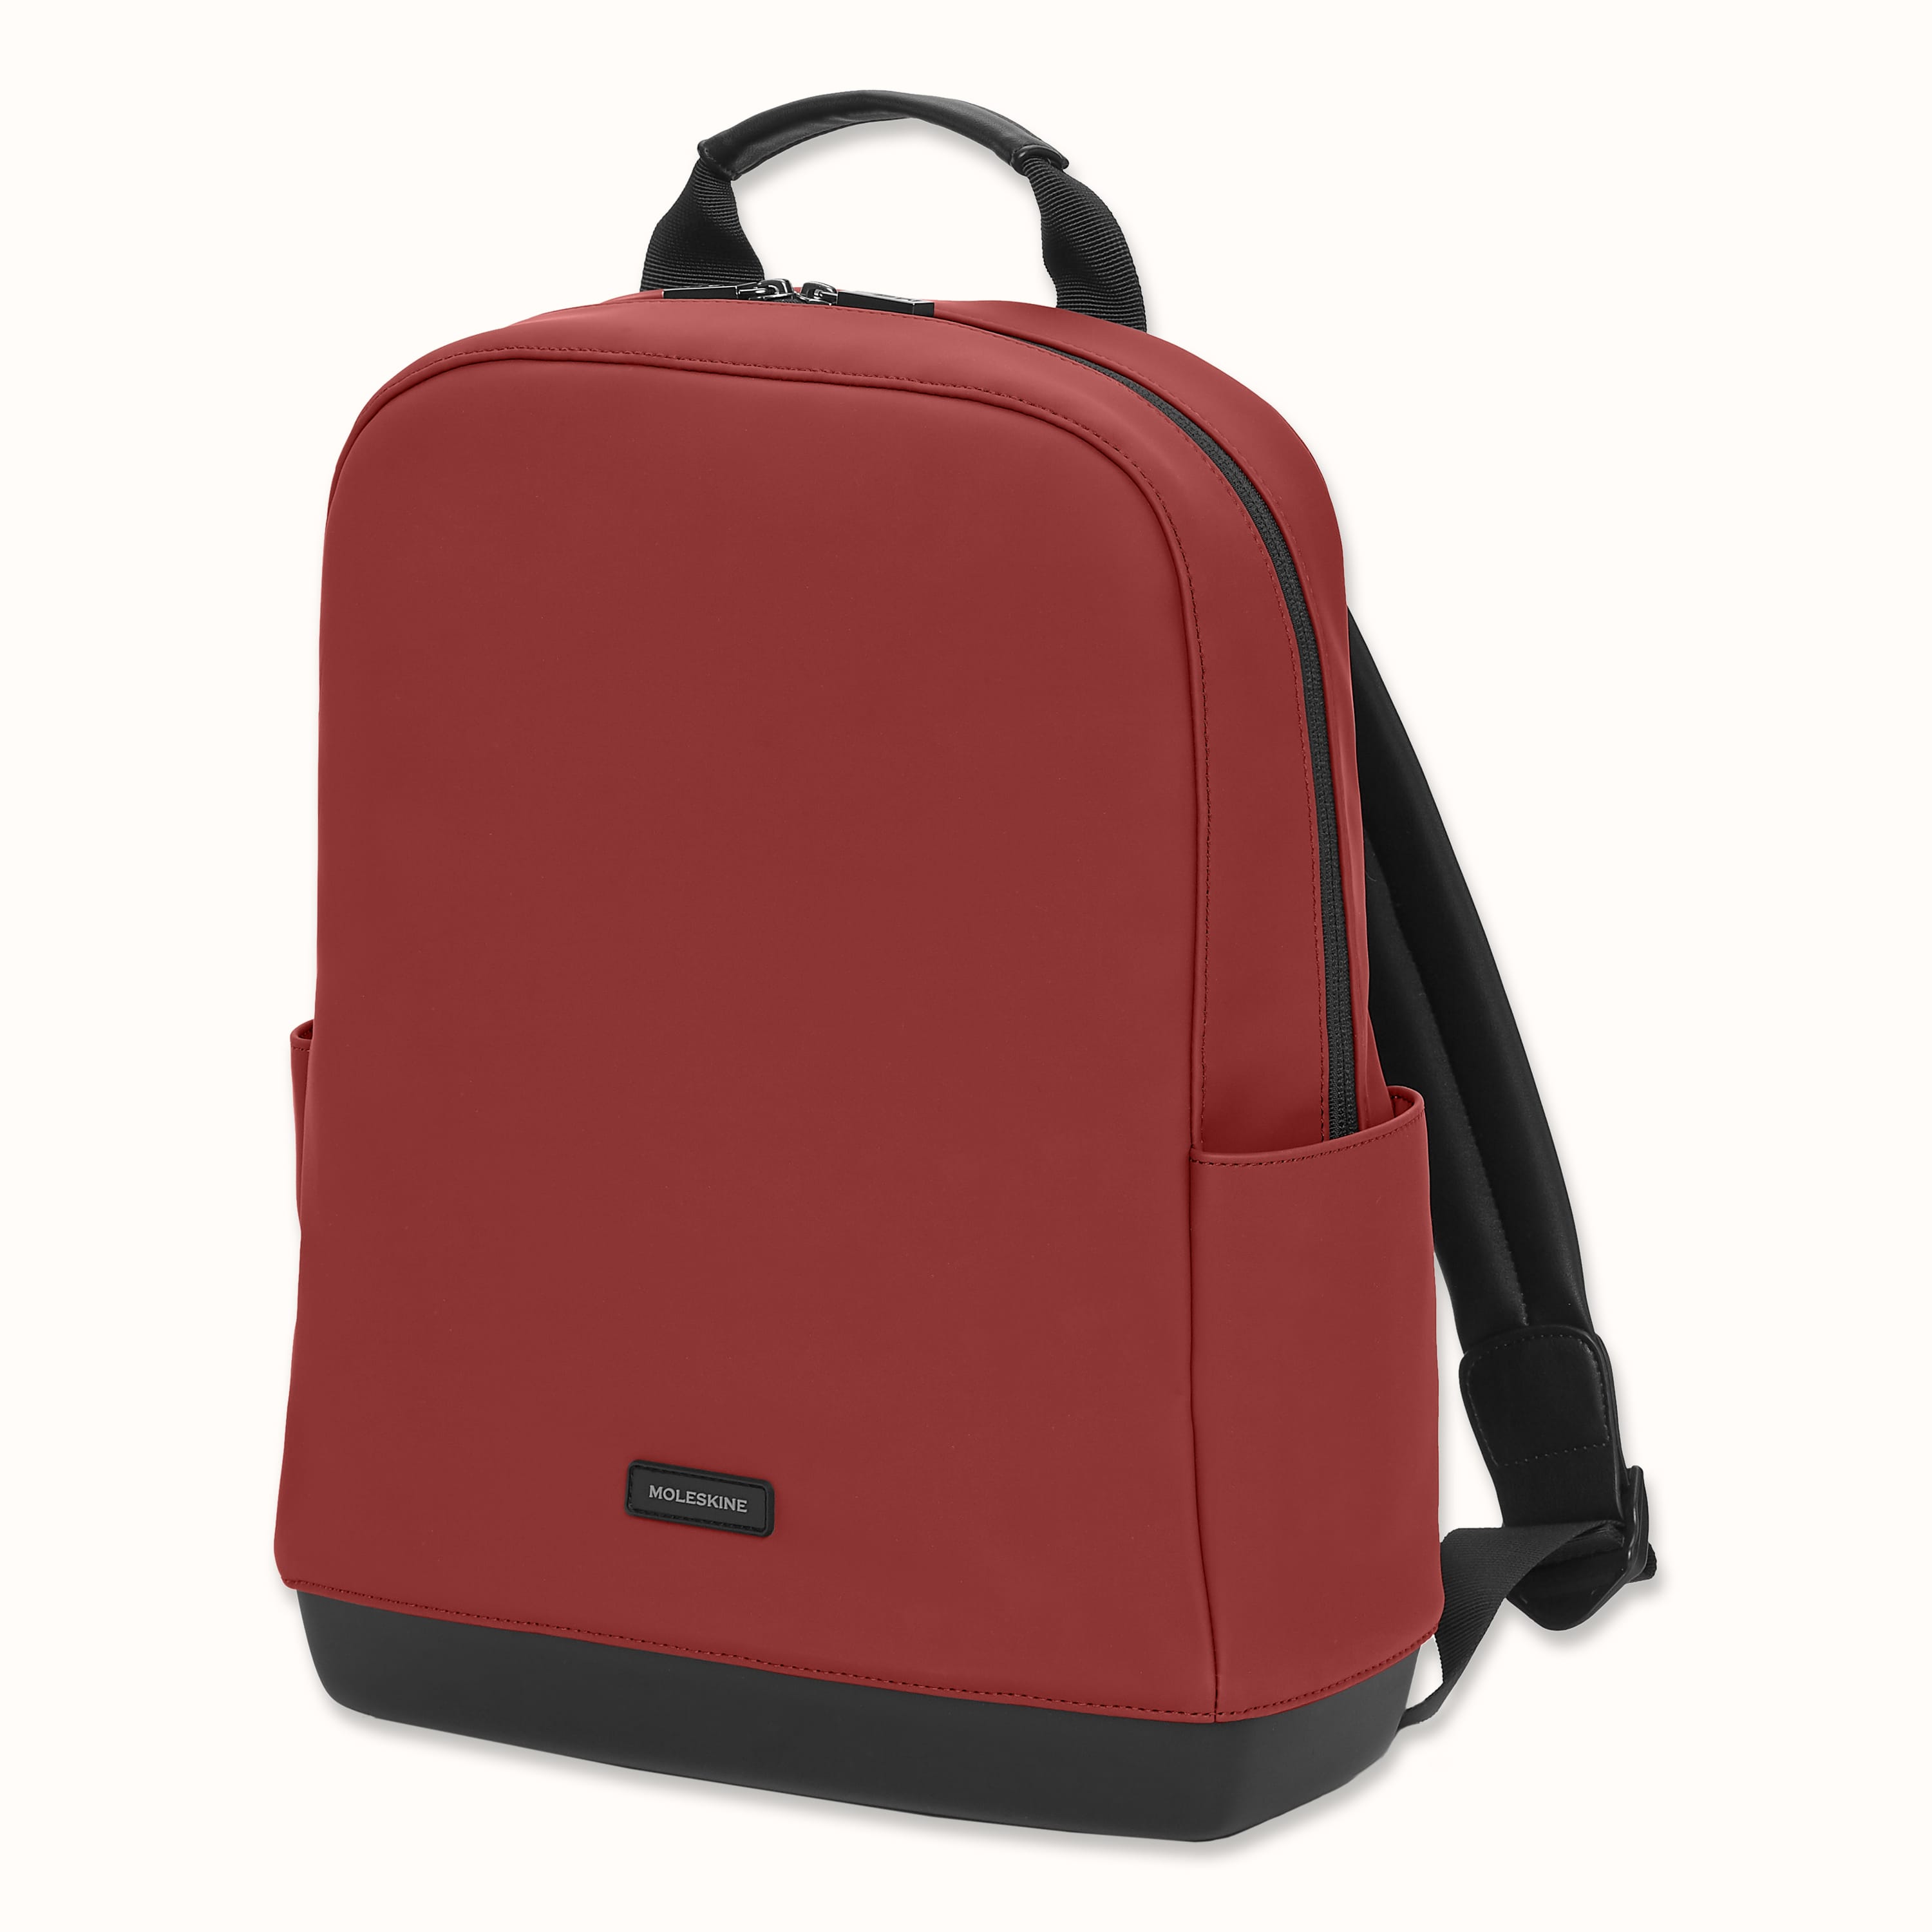 The Backpack - PU morbido Collezione The Backpack Rosso Bordeaux